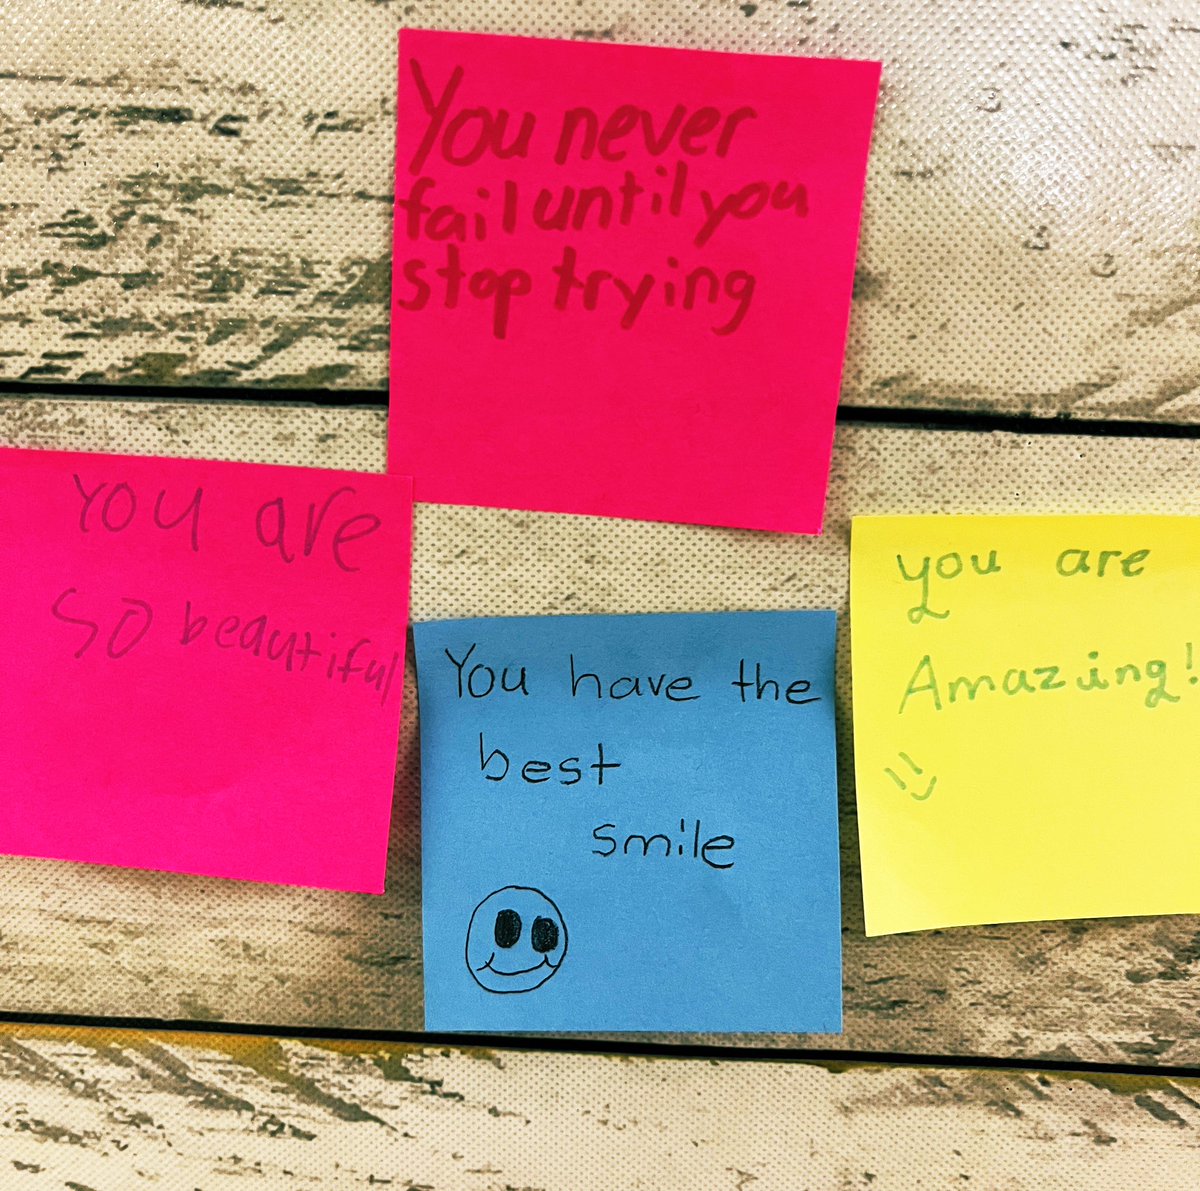 So proud of how our students are looking after each other and being kind to each other. Our wellness matters. #ECSD #ECSDfaithinspires #YEGmoms